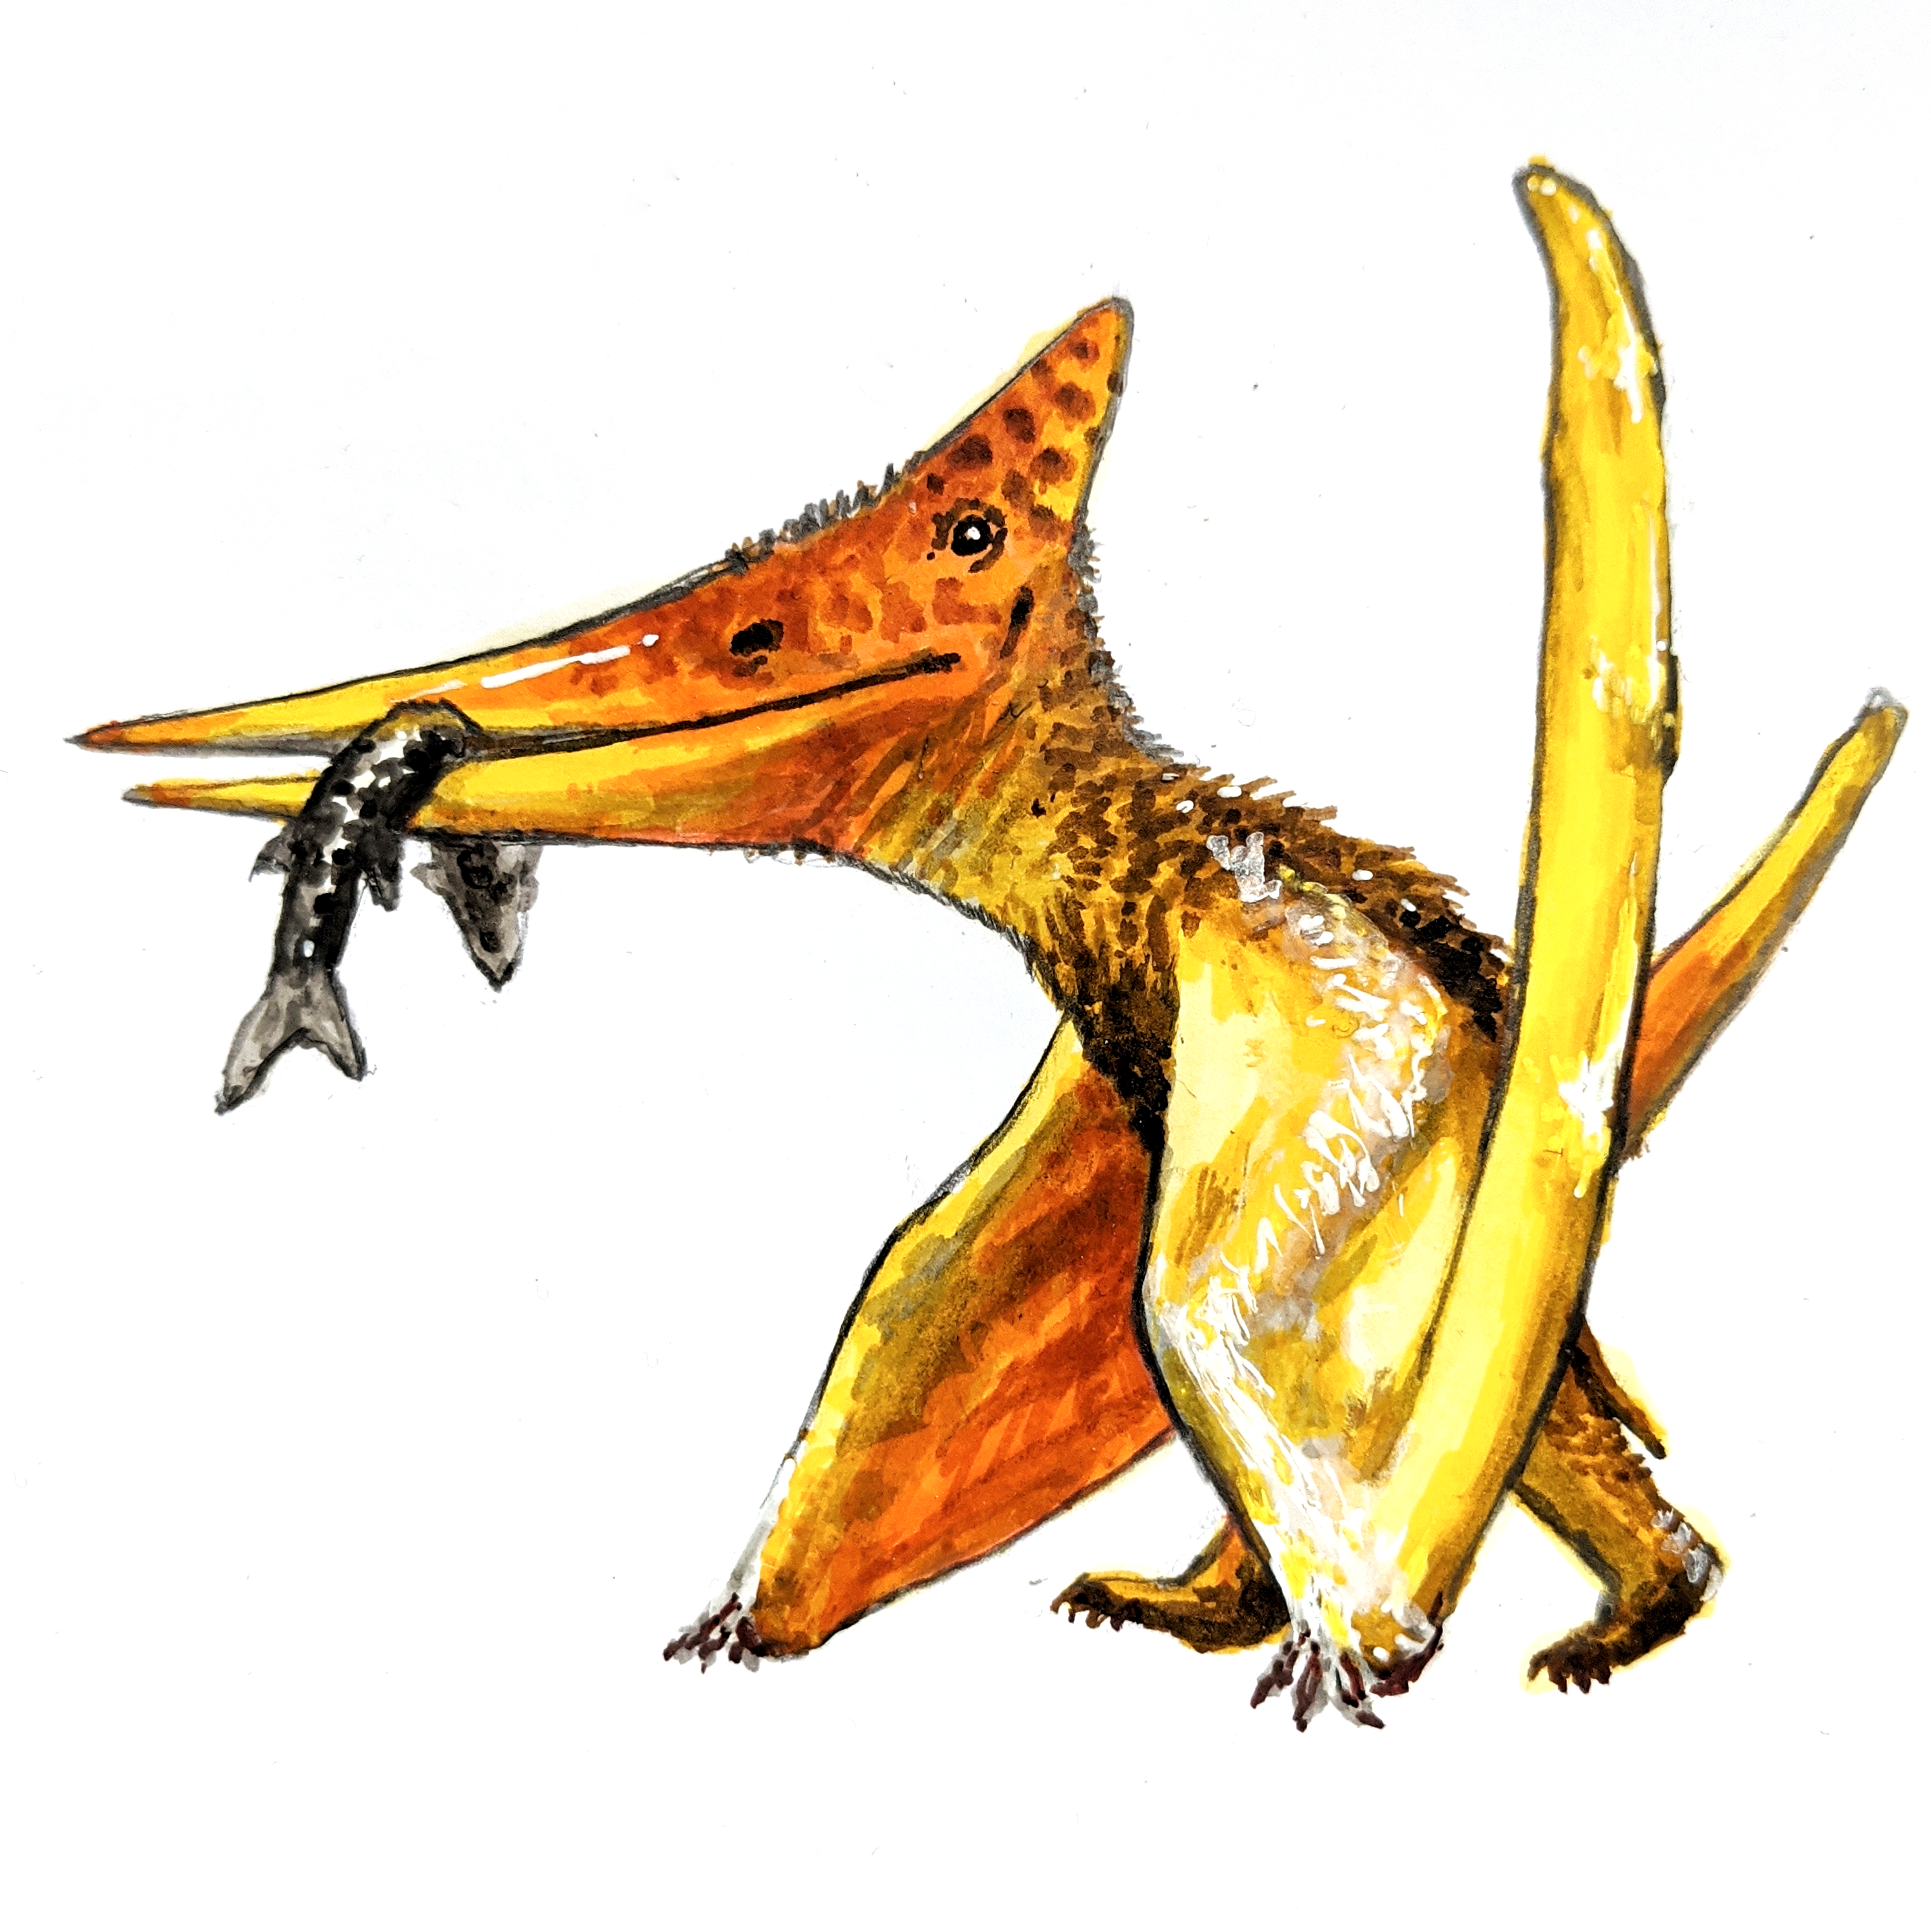 Orange and yellow Pteranodon, an ancient reptile